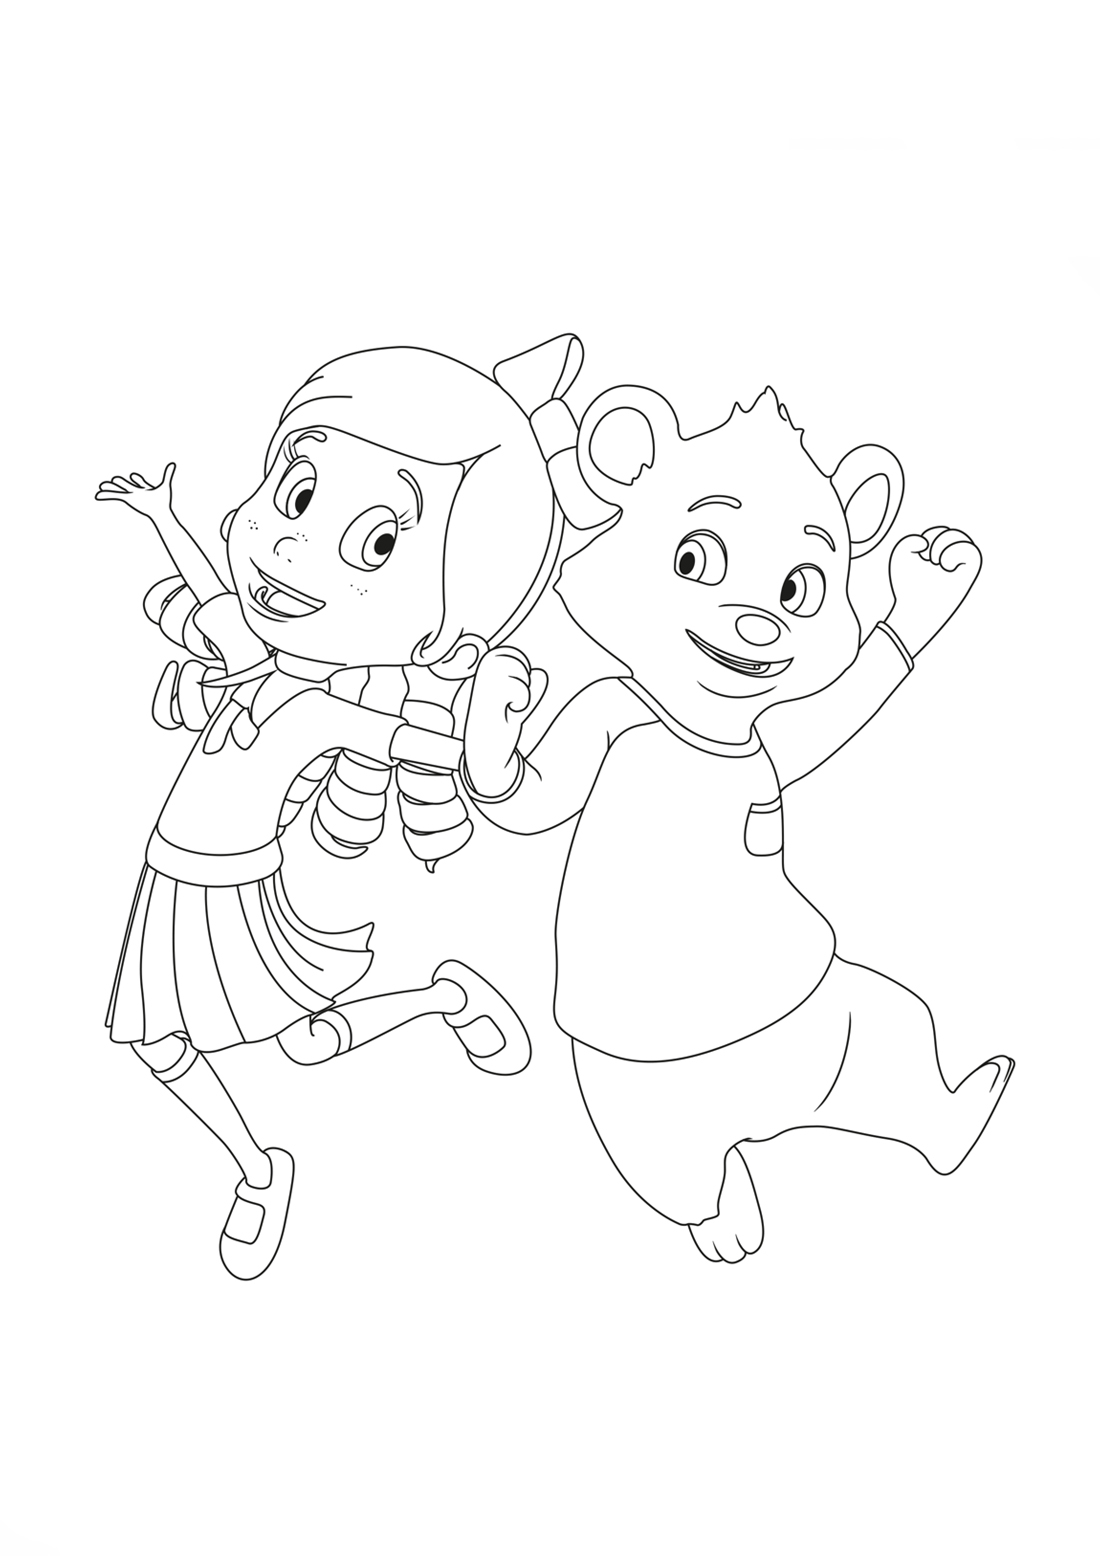 Free Gol and Bear coloring pages to print for kids Download print and color